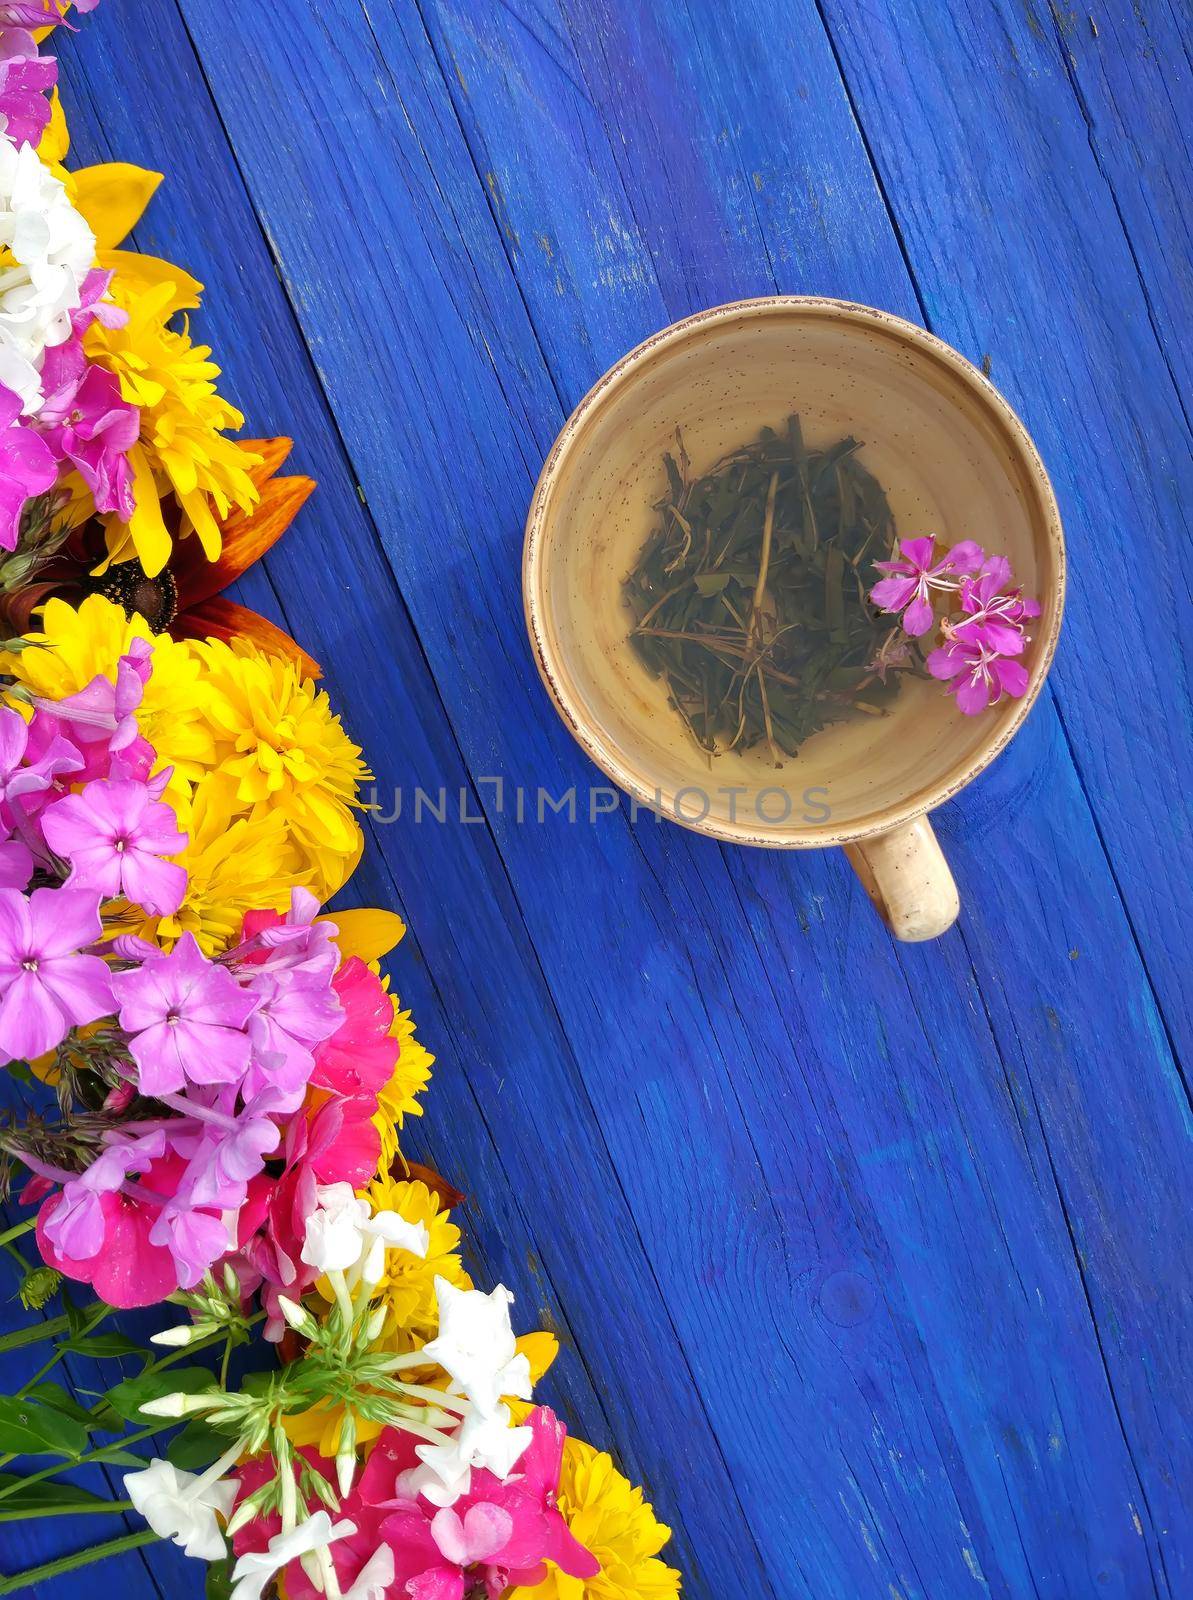 Natural herbal tea with purple fresh flowers and leaves of medical fireweed plant n ceramic cup on blue wooden boards outdoors.